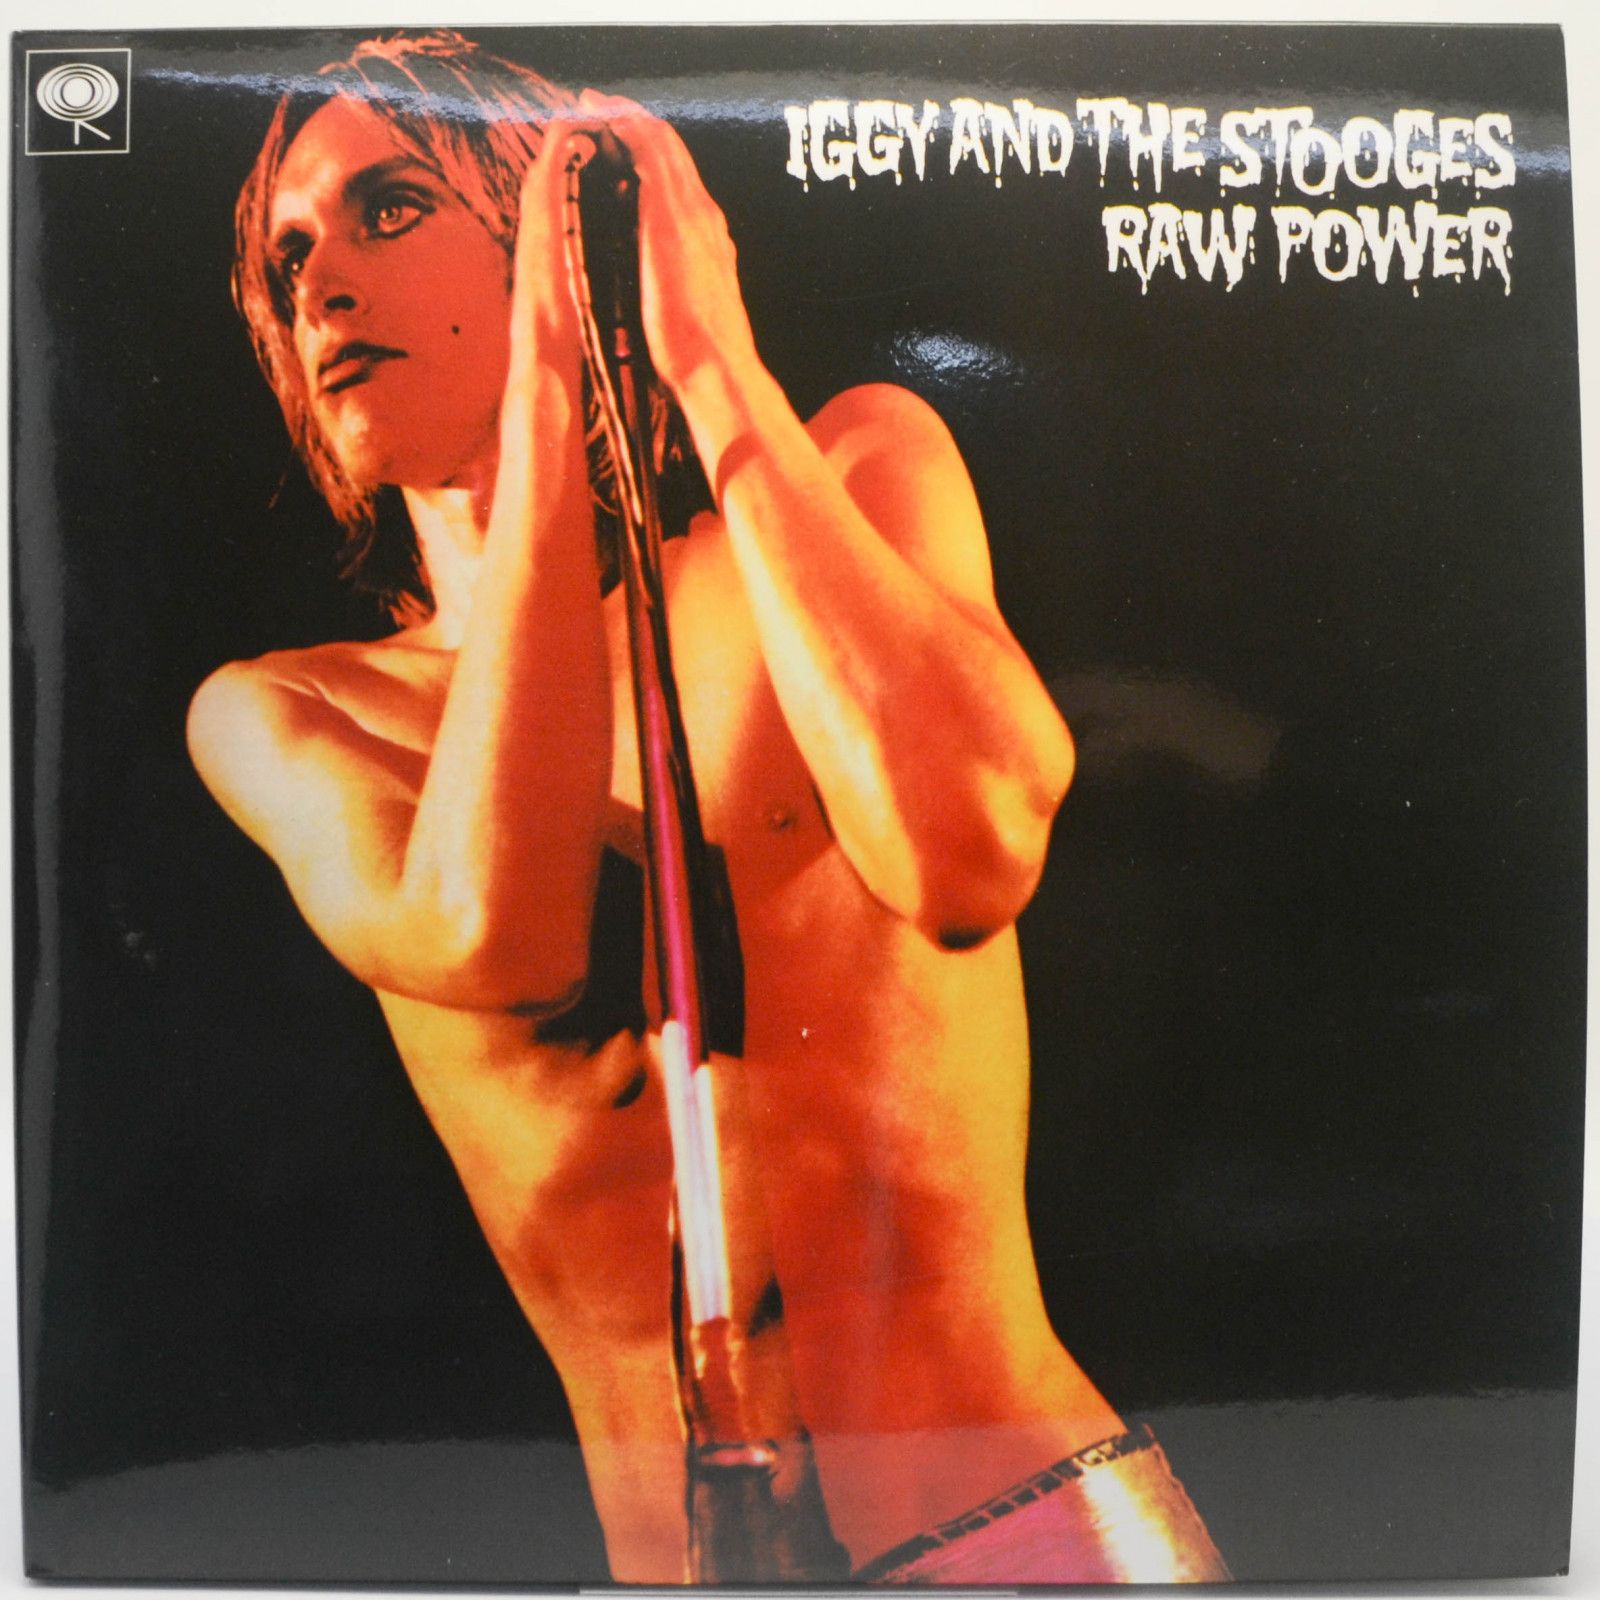 Iggy And The Stooges — Raw Power (2LP), 1973